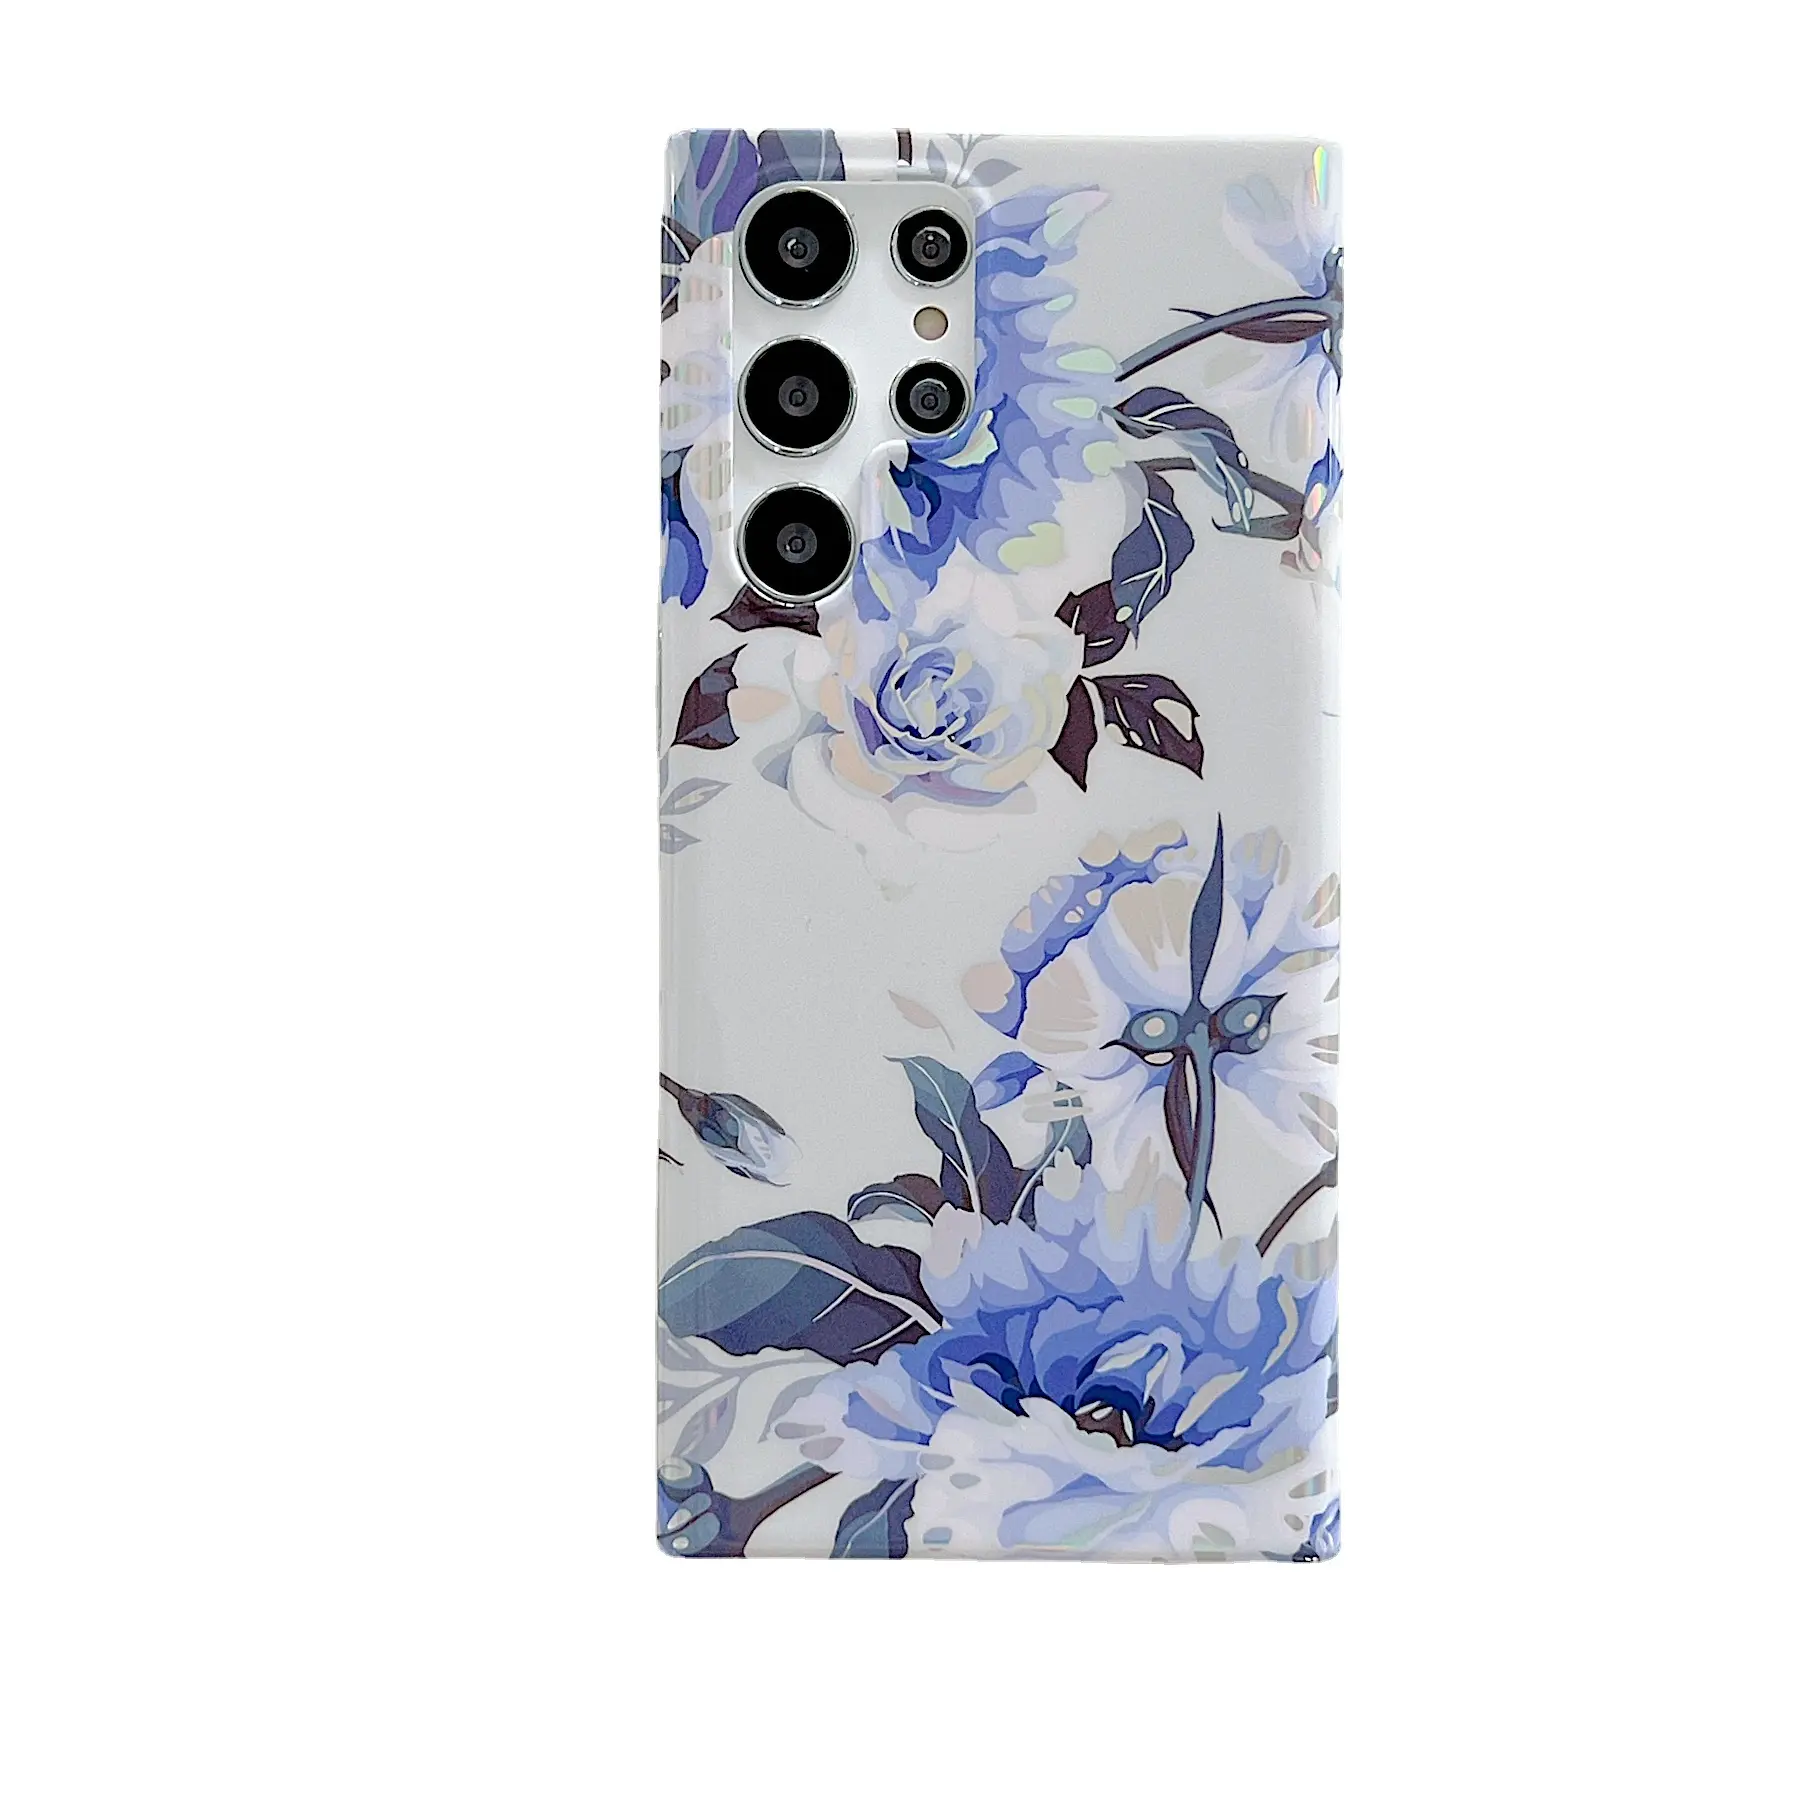 Fashion Laser Flower Phone Case For Samsung S22 S21 S20 Ultra Plus FE A51 A52 A71 A72 A32 5G A21S Shockproof Soft TPU Back Cover